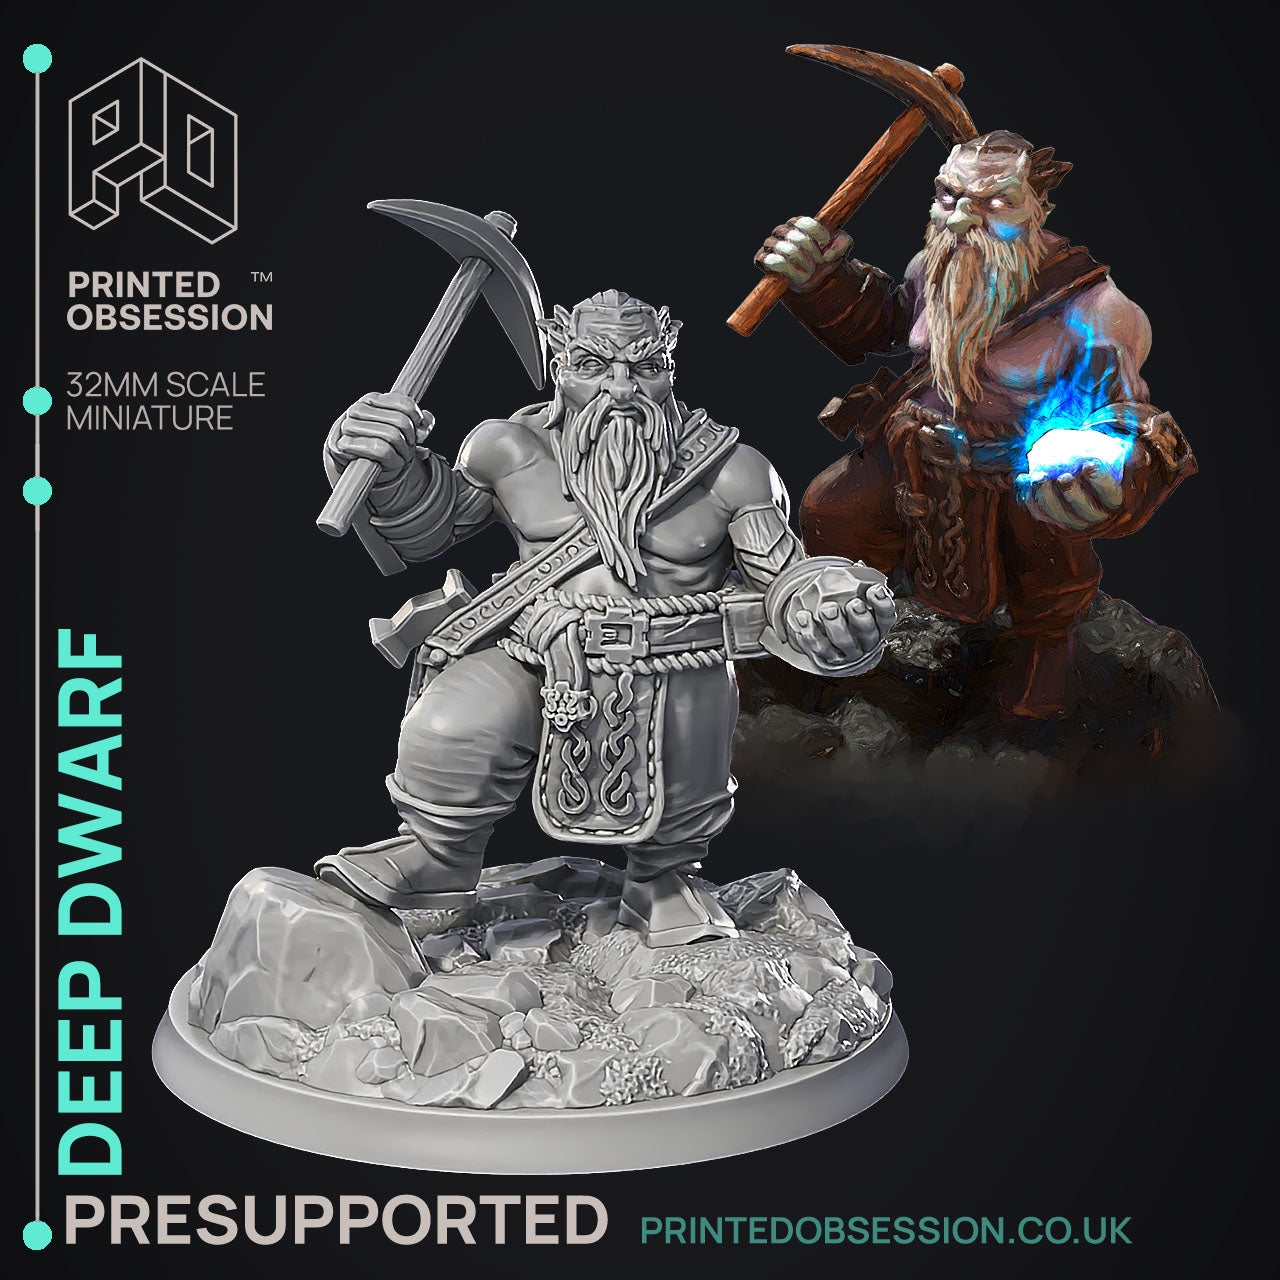 Deep Dwarf - Were Folk - The Printed Obsession - Table-top mini, 3D Printed Collectable for painting and playing!